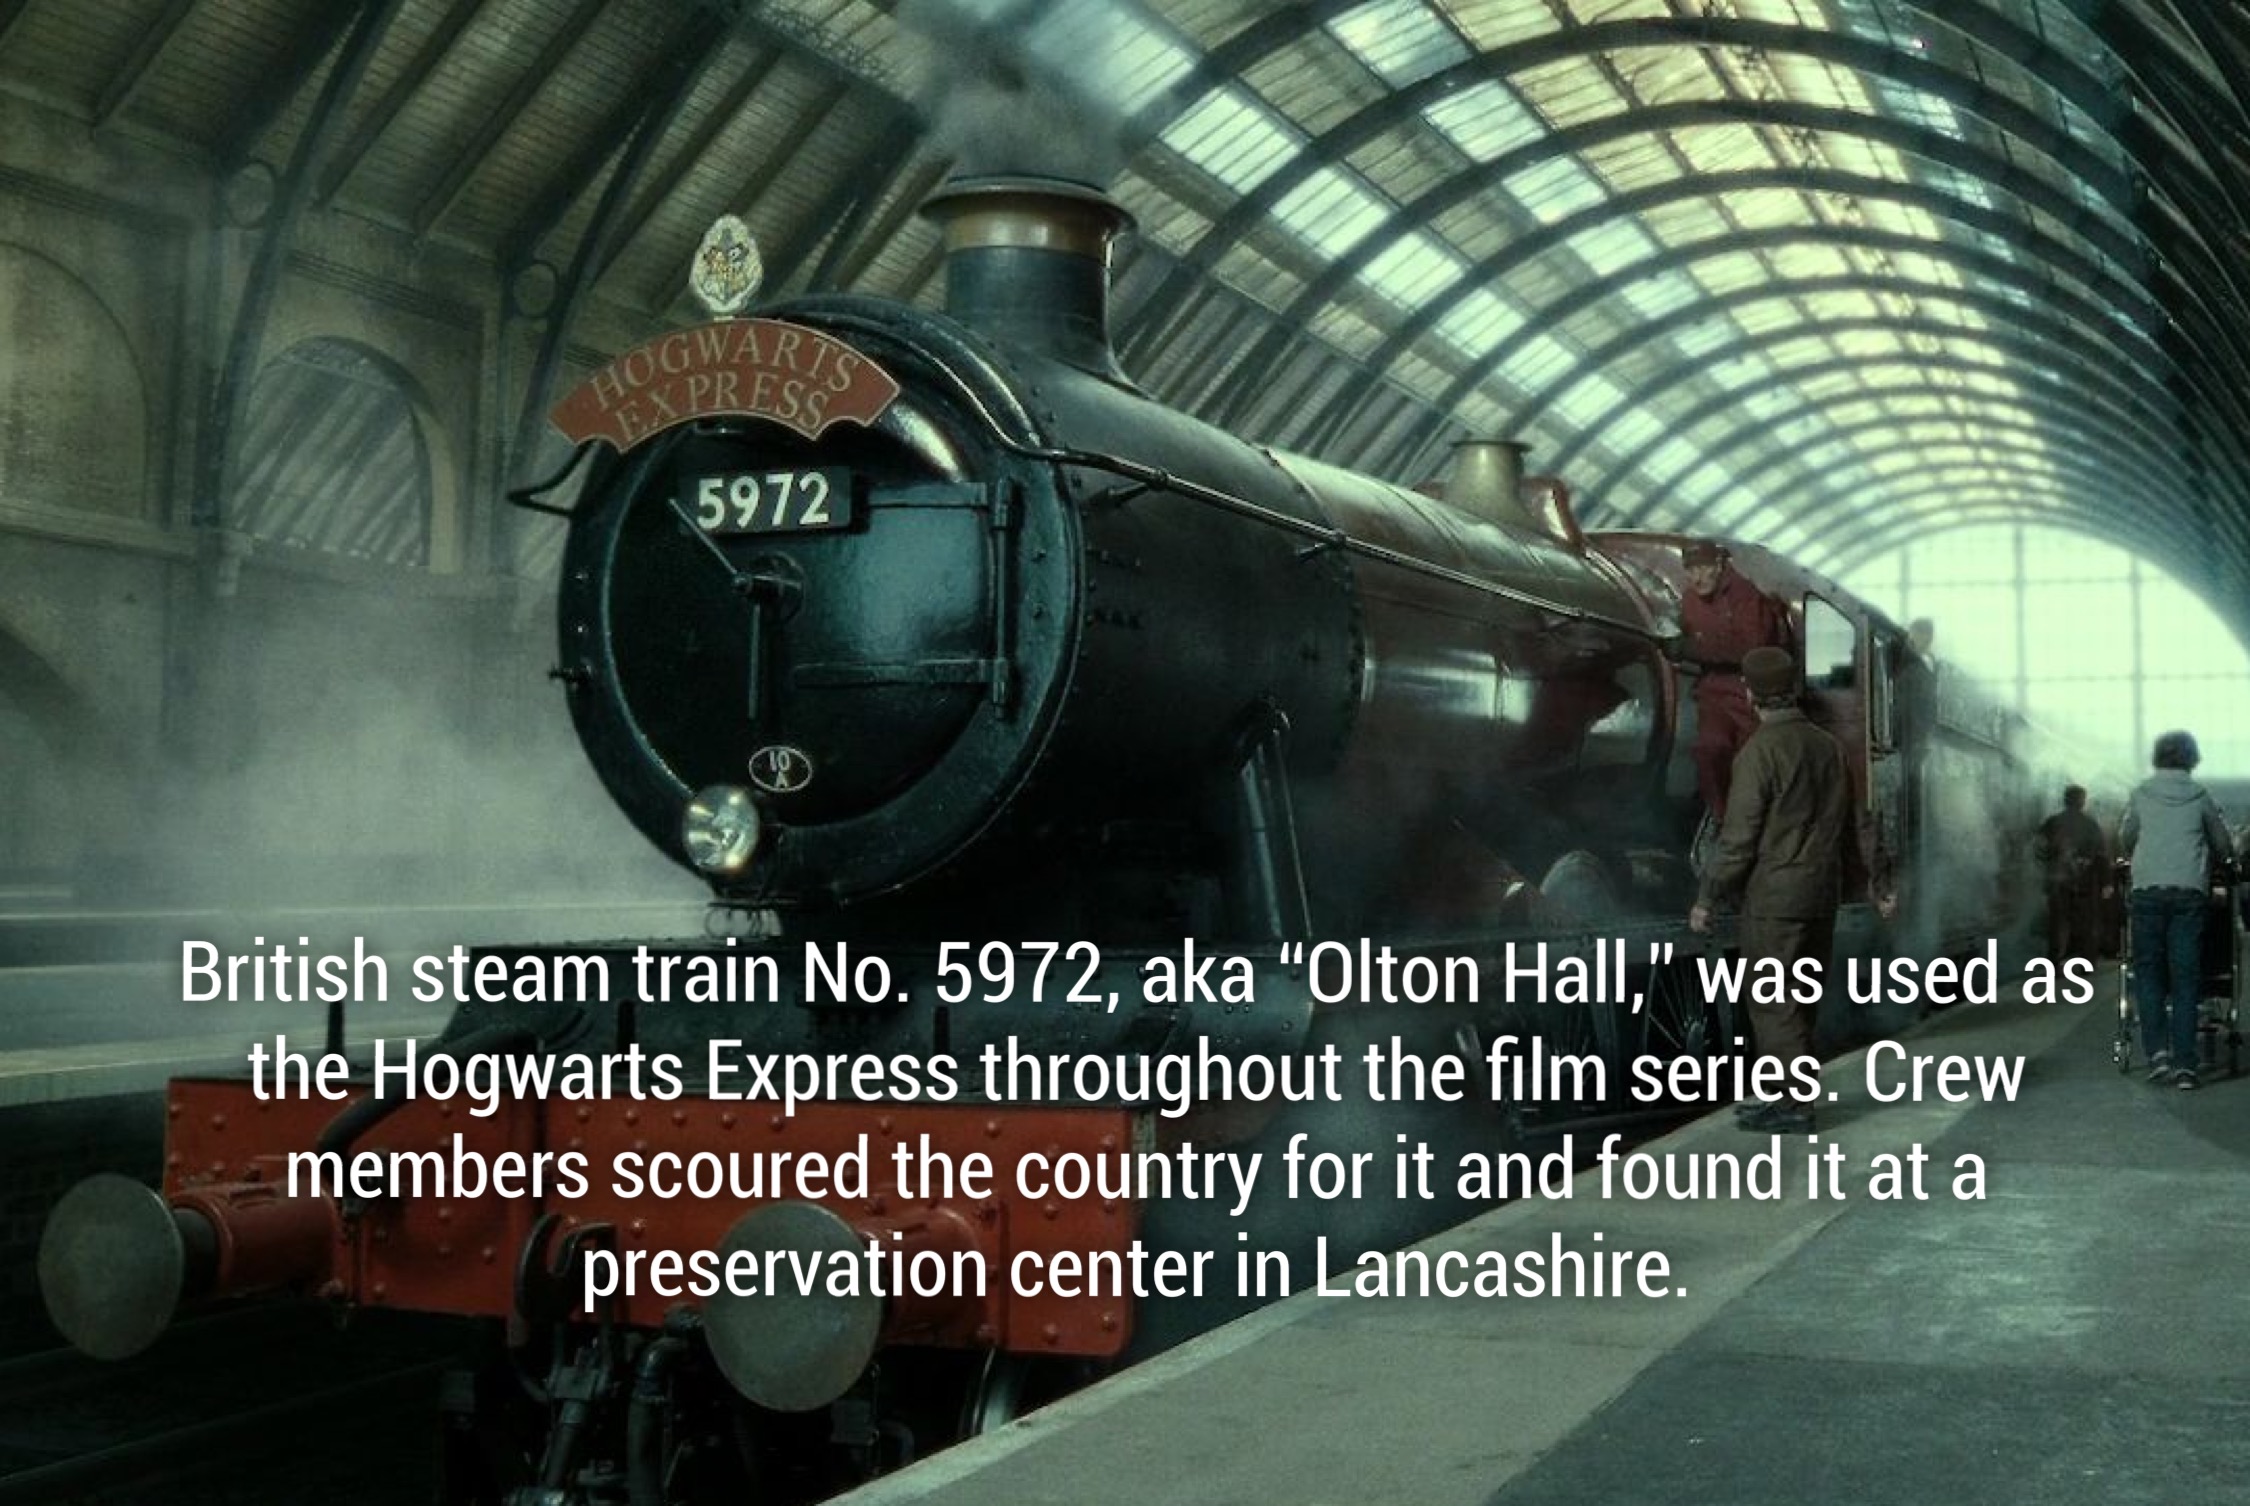 hogwarts express - Press 5972 British steam train No. 5972, aka "Olton Hall," was used as the Hogwarts Express throughout the film series. Crew members scoured the country for it and found it at a preservation center in Lancashire.